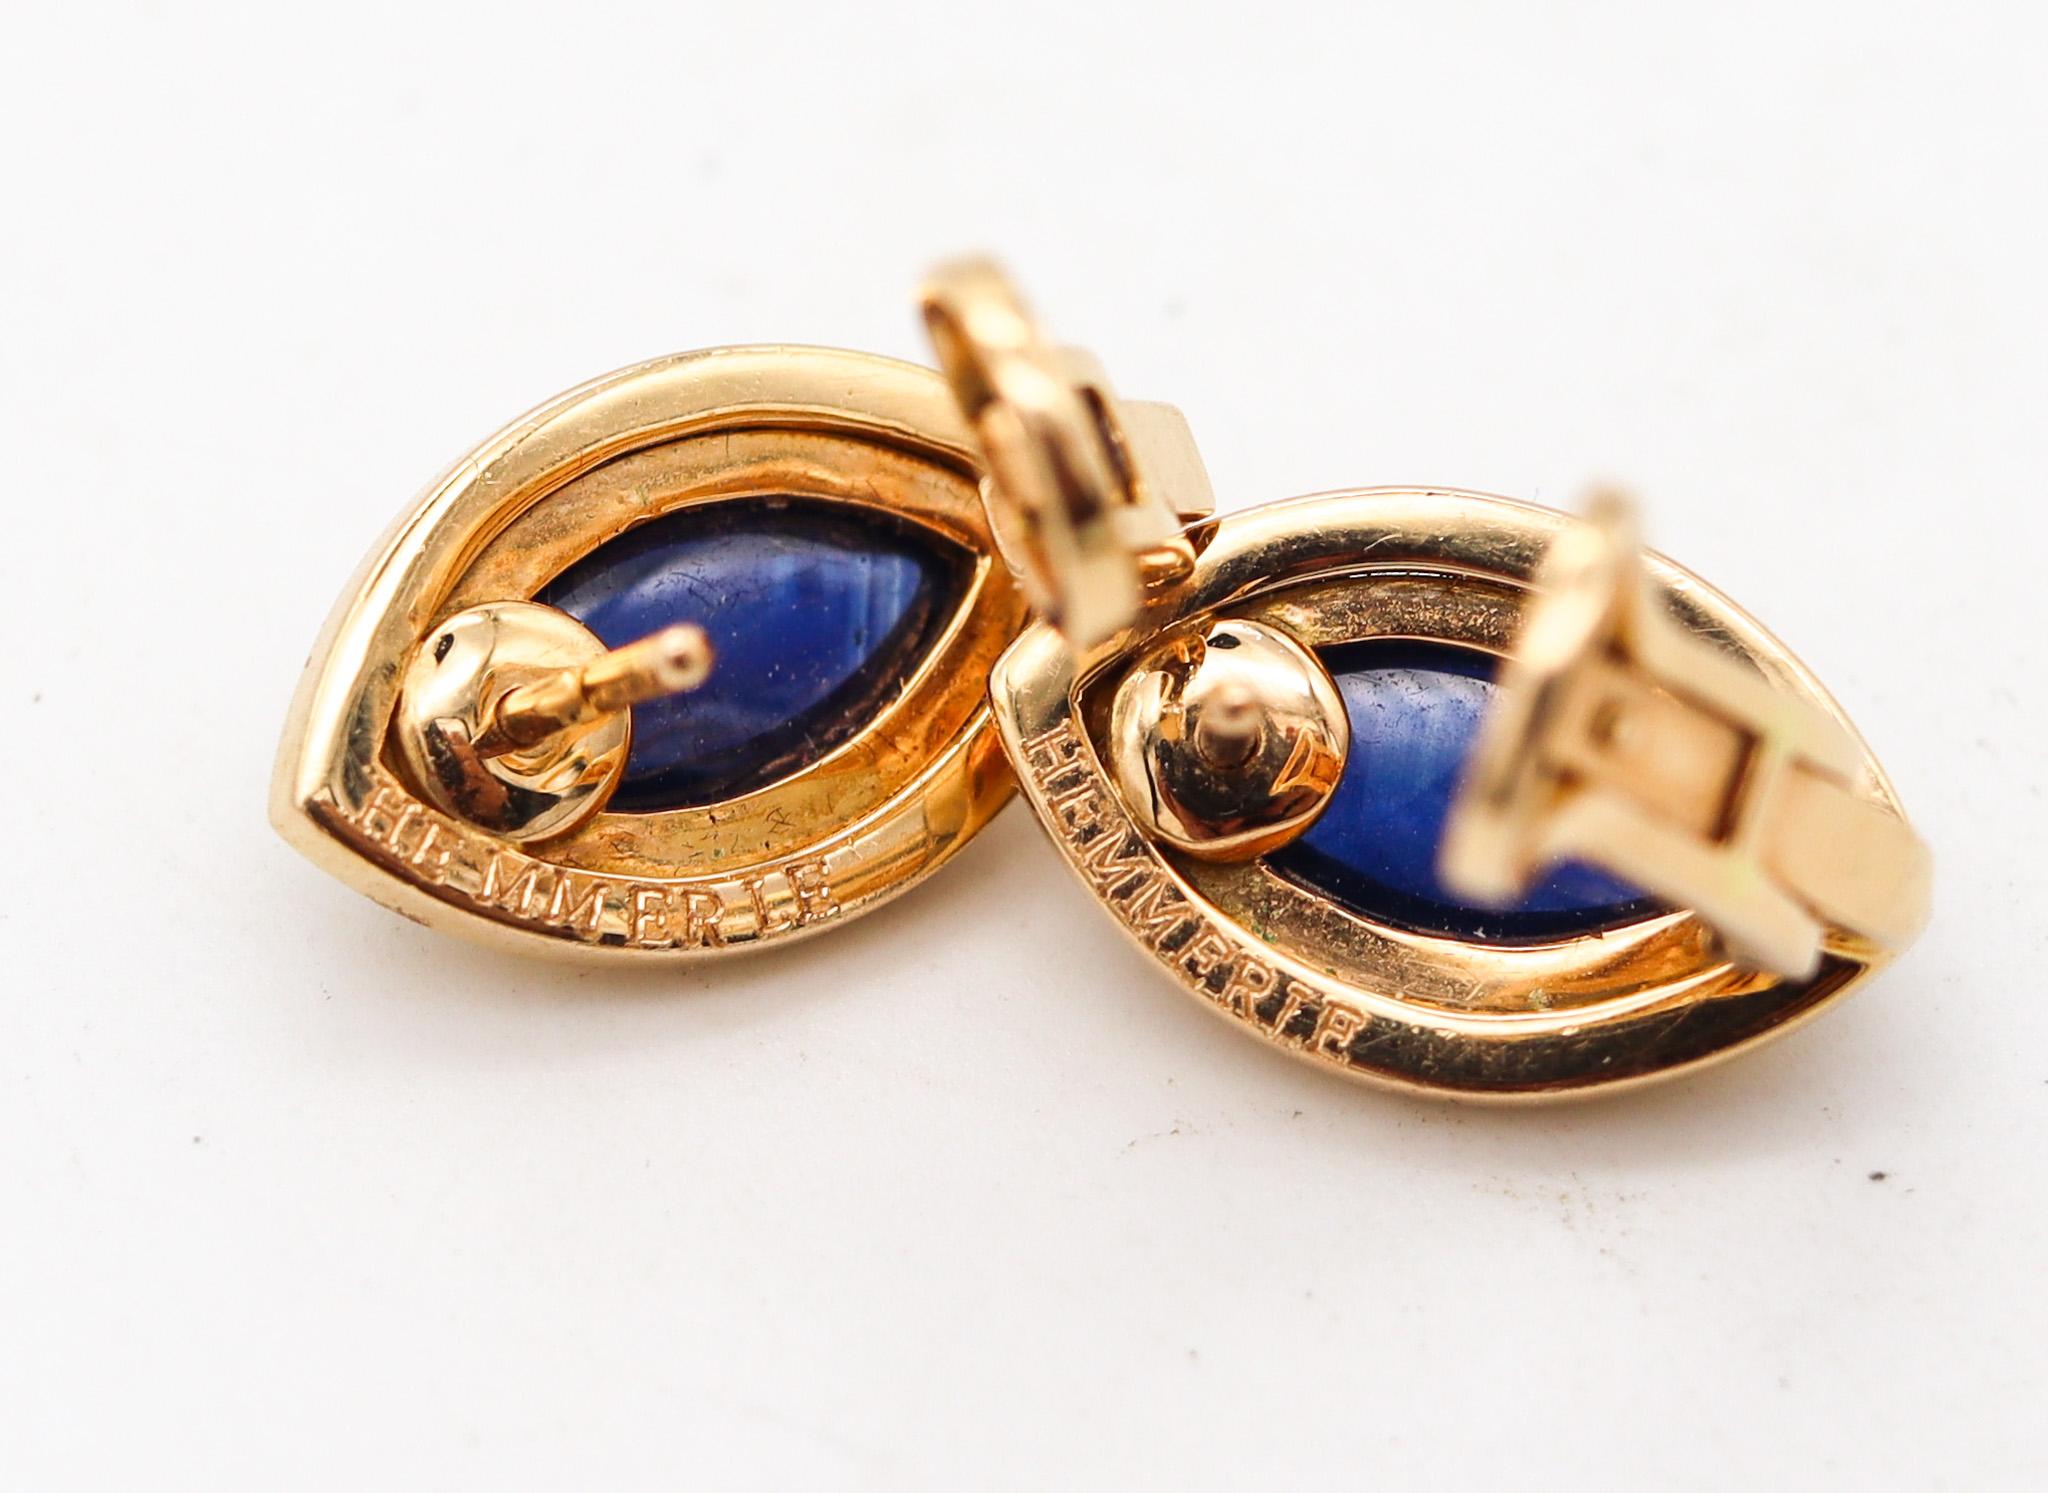 Hemmerle Munich Clips On Earrings In 18Kt Yellow Gold With 9.62 Ctw In Sapphires In Excellent Condition For Sale In Miami, FL